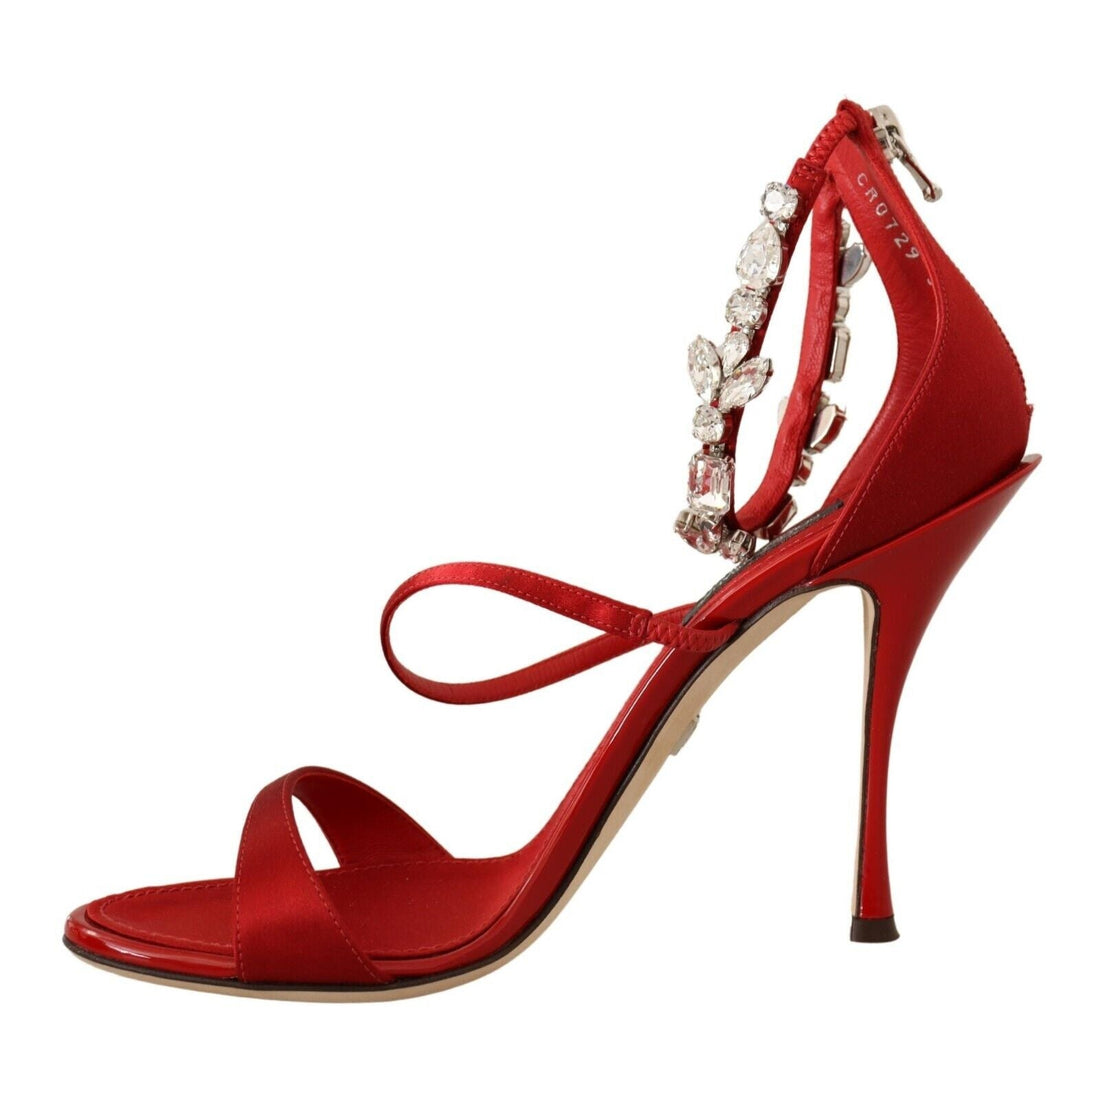 Dolce & Gabbana Red Satin Crystals Sandals Keira Heels Shoes - Paris Deluxe